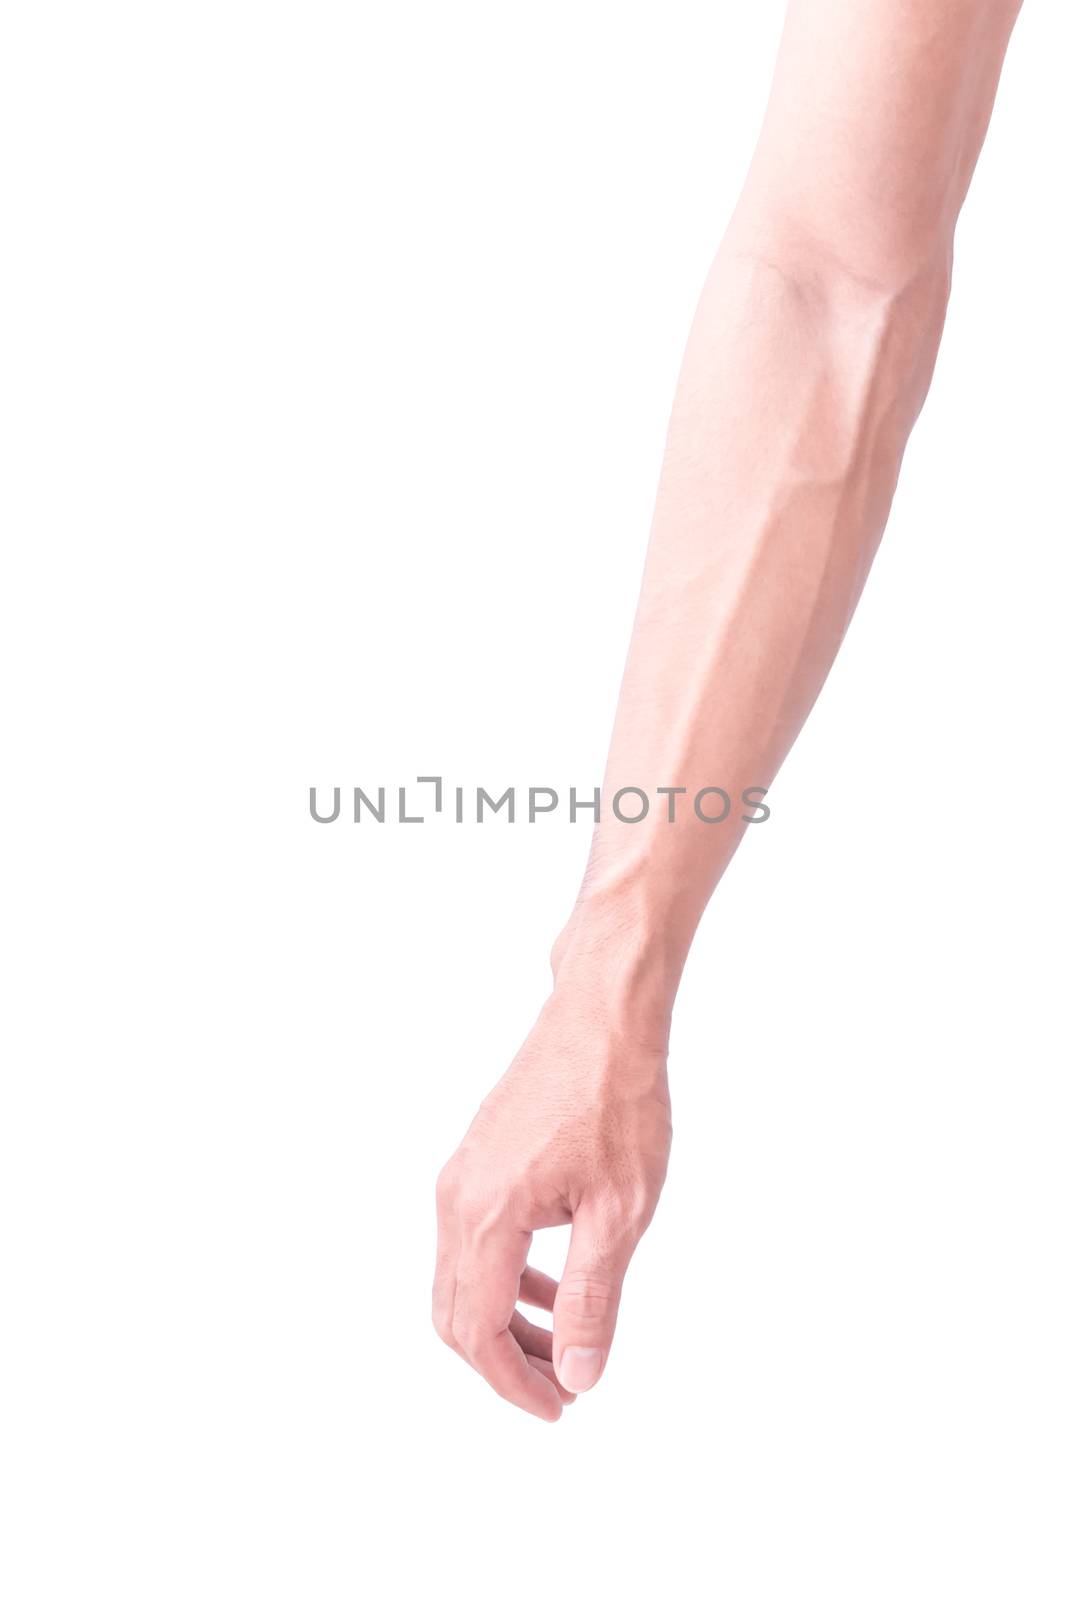 Man arm with blood veins on white background by pt.pongsak@gmail.com